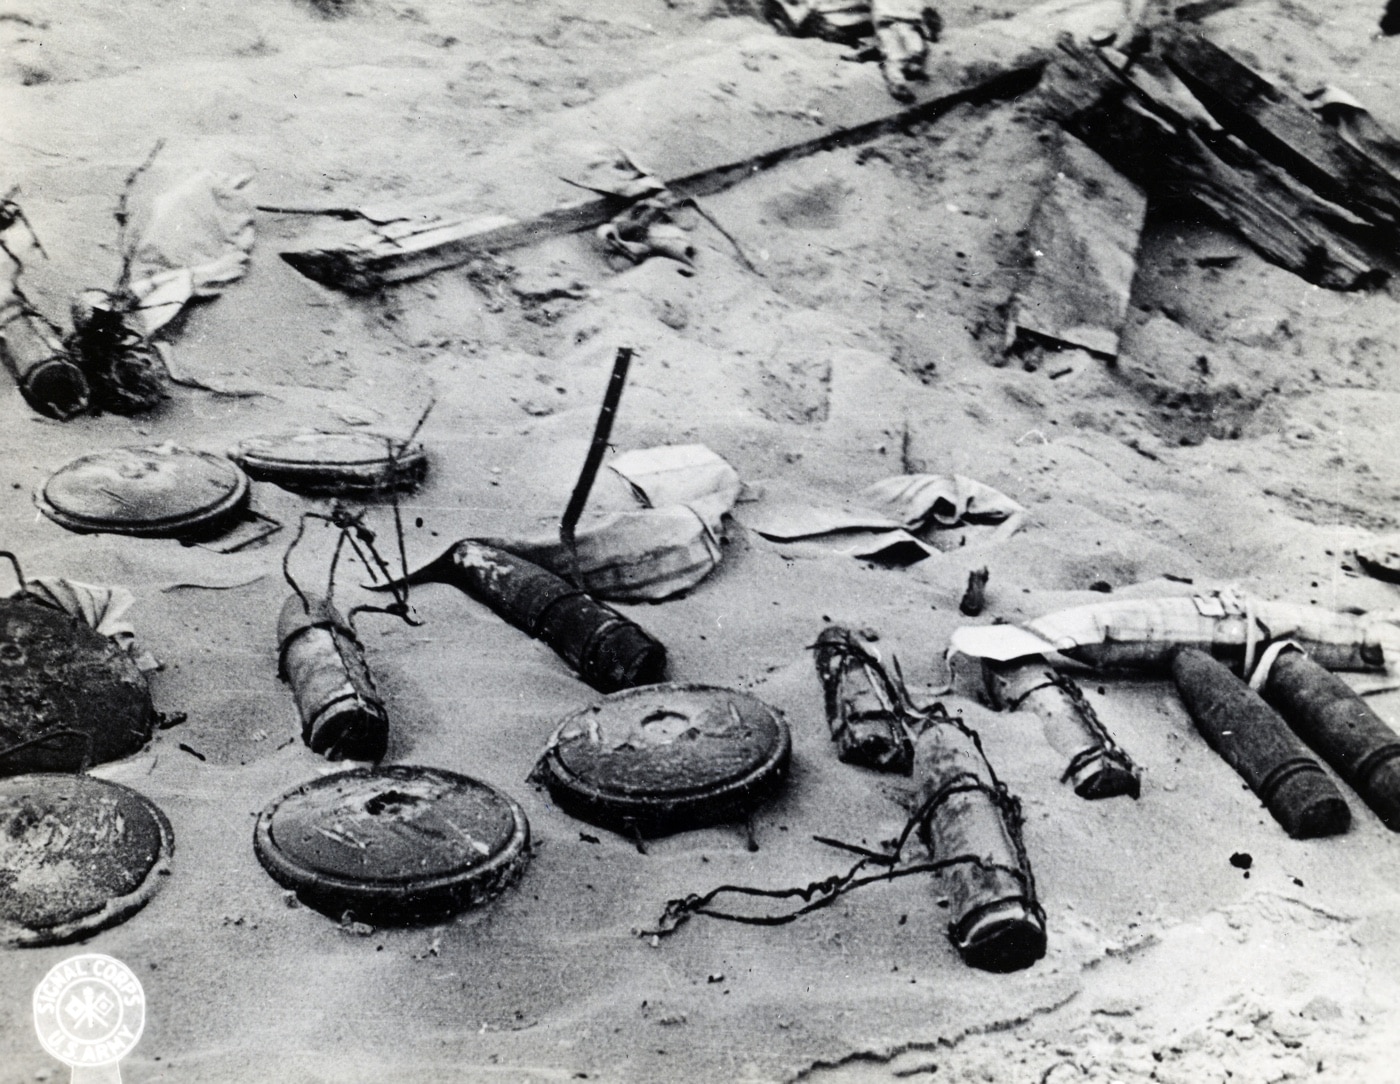 Shown in this photograph is a variety of German mines used in Normandy France. Soldiers landing in Operation Neptune had to be prepared for these Atlantic Wall defenses.